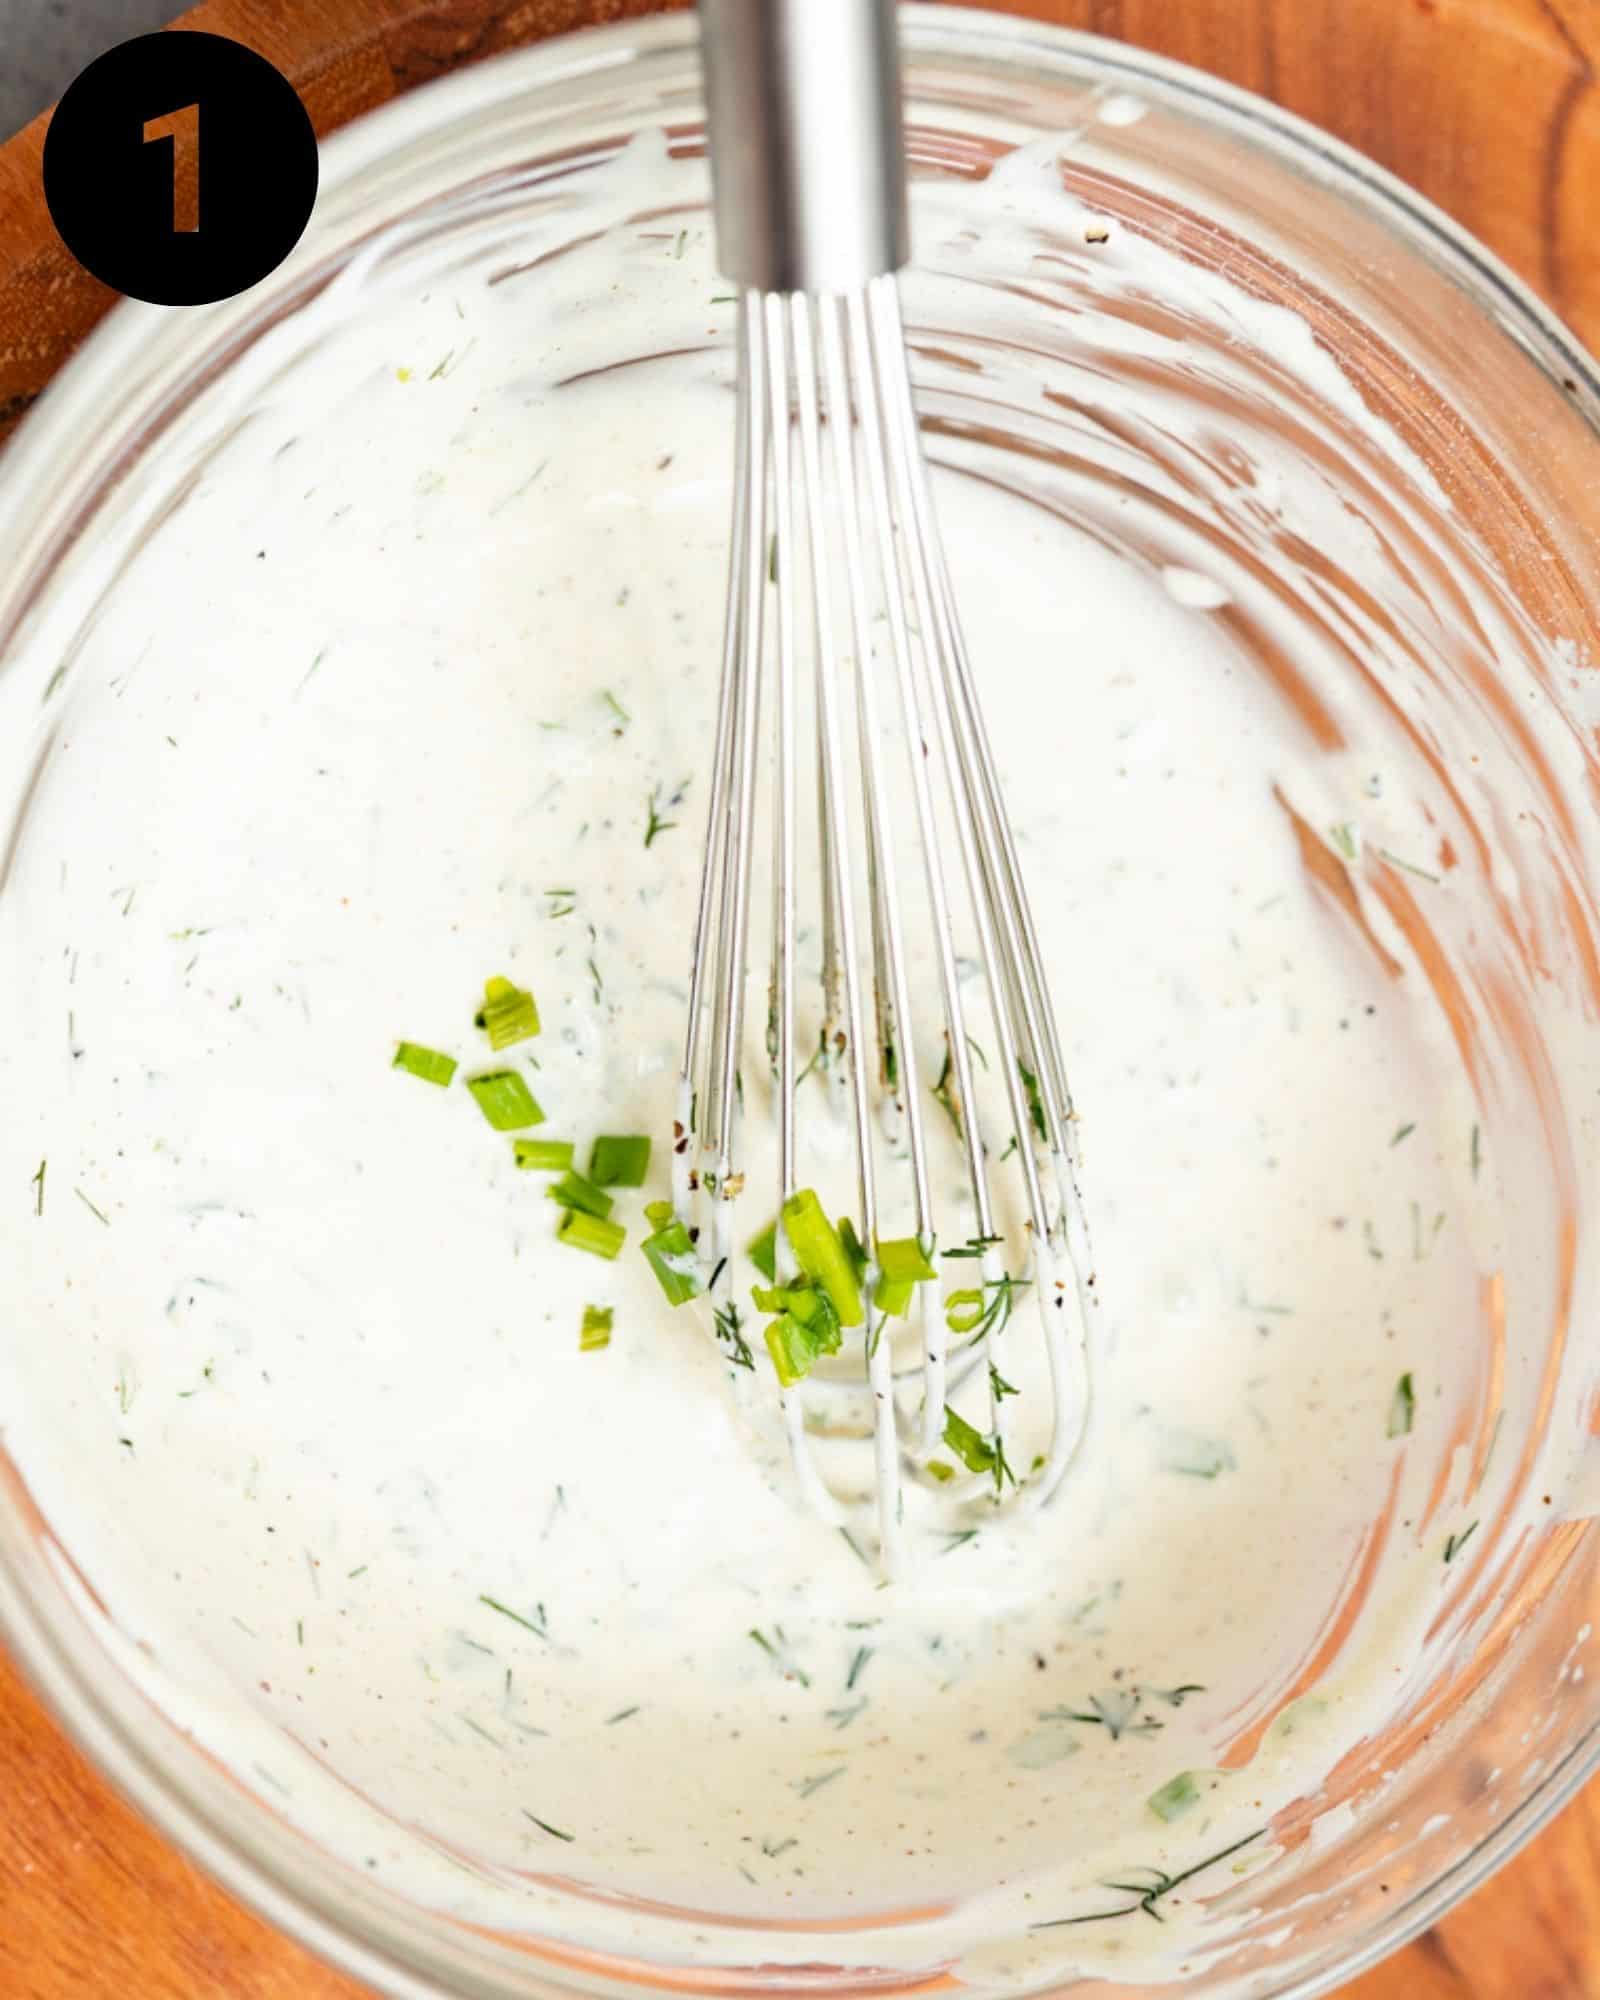 mayo, lemon juice, dill, chives, and seasonings whisked together in a bowl.